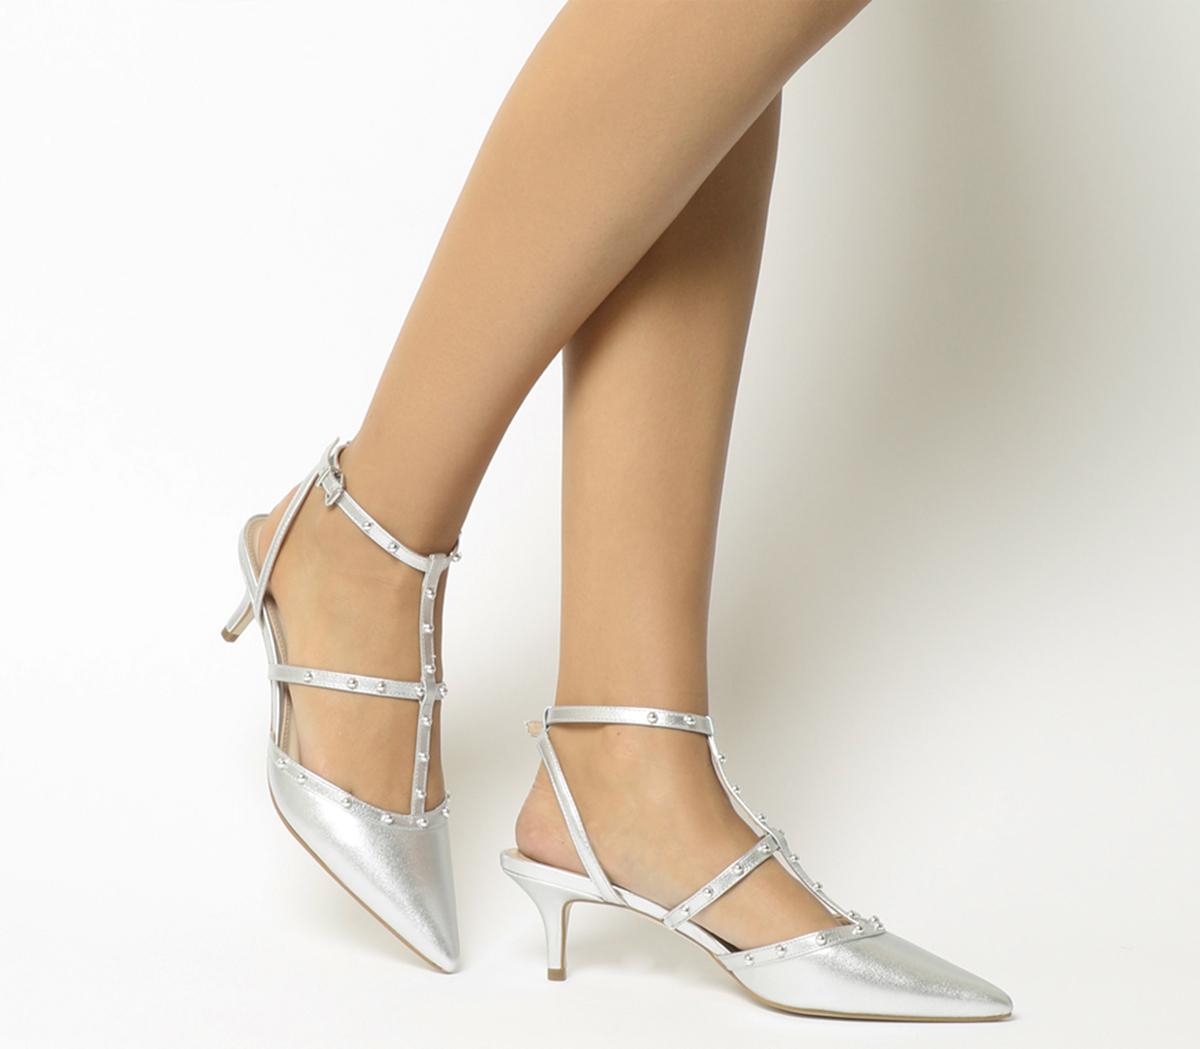 silver pointed heels